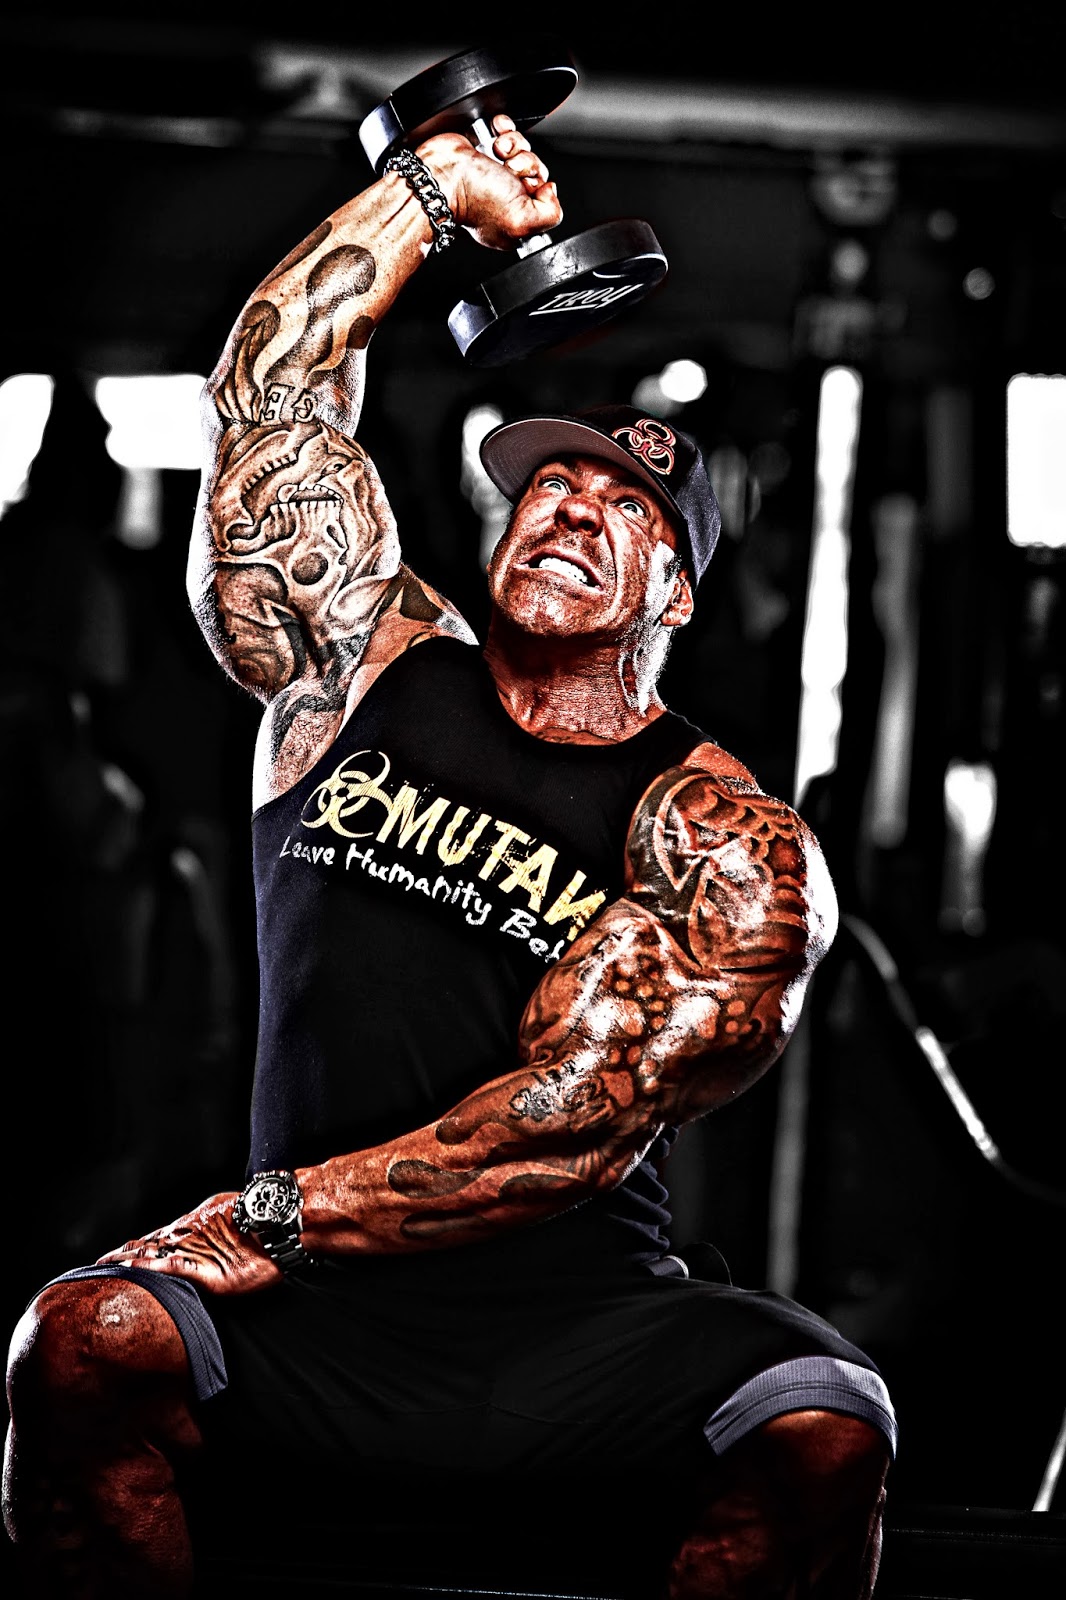 Best Rich piana tricep workout with Comfort Workout Clothes